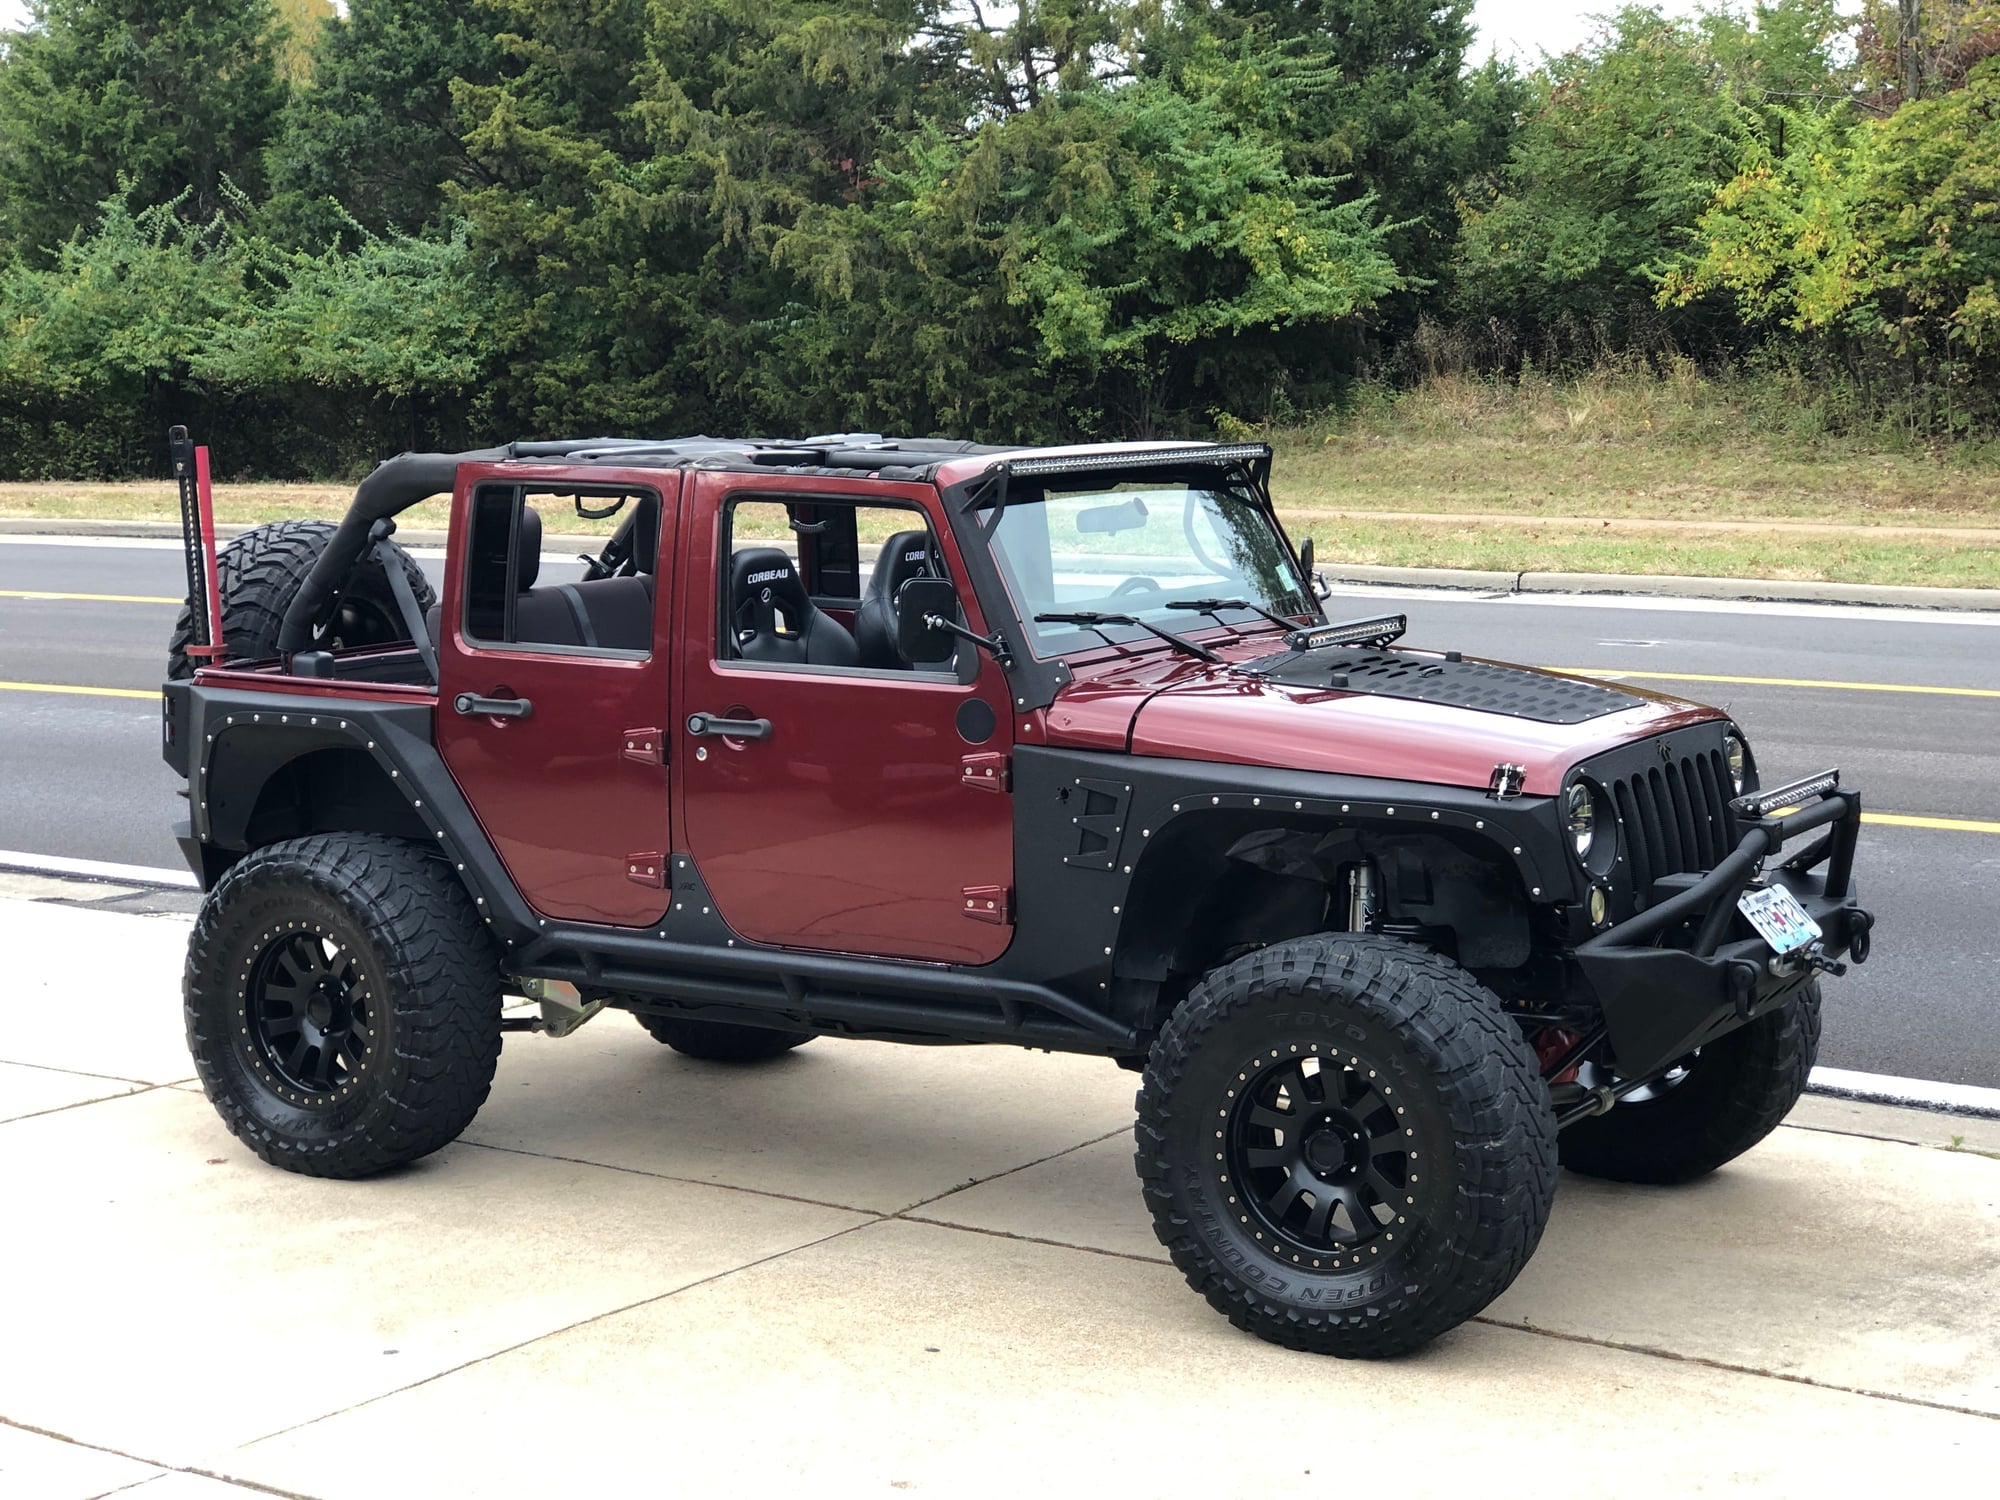 2008 Jeep Wrangler LS2 Motech V8 Conversion  - The top  destination for Jeep JK and JL Wrangler news, rumors, and discussion